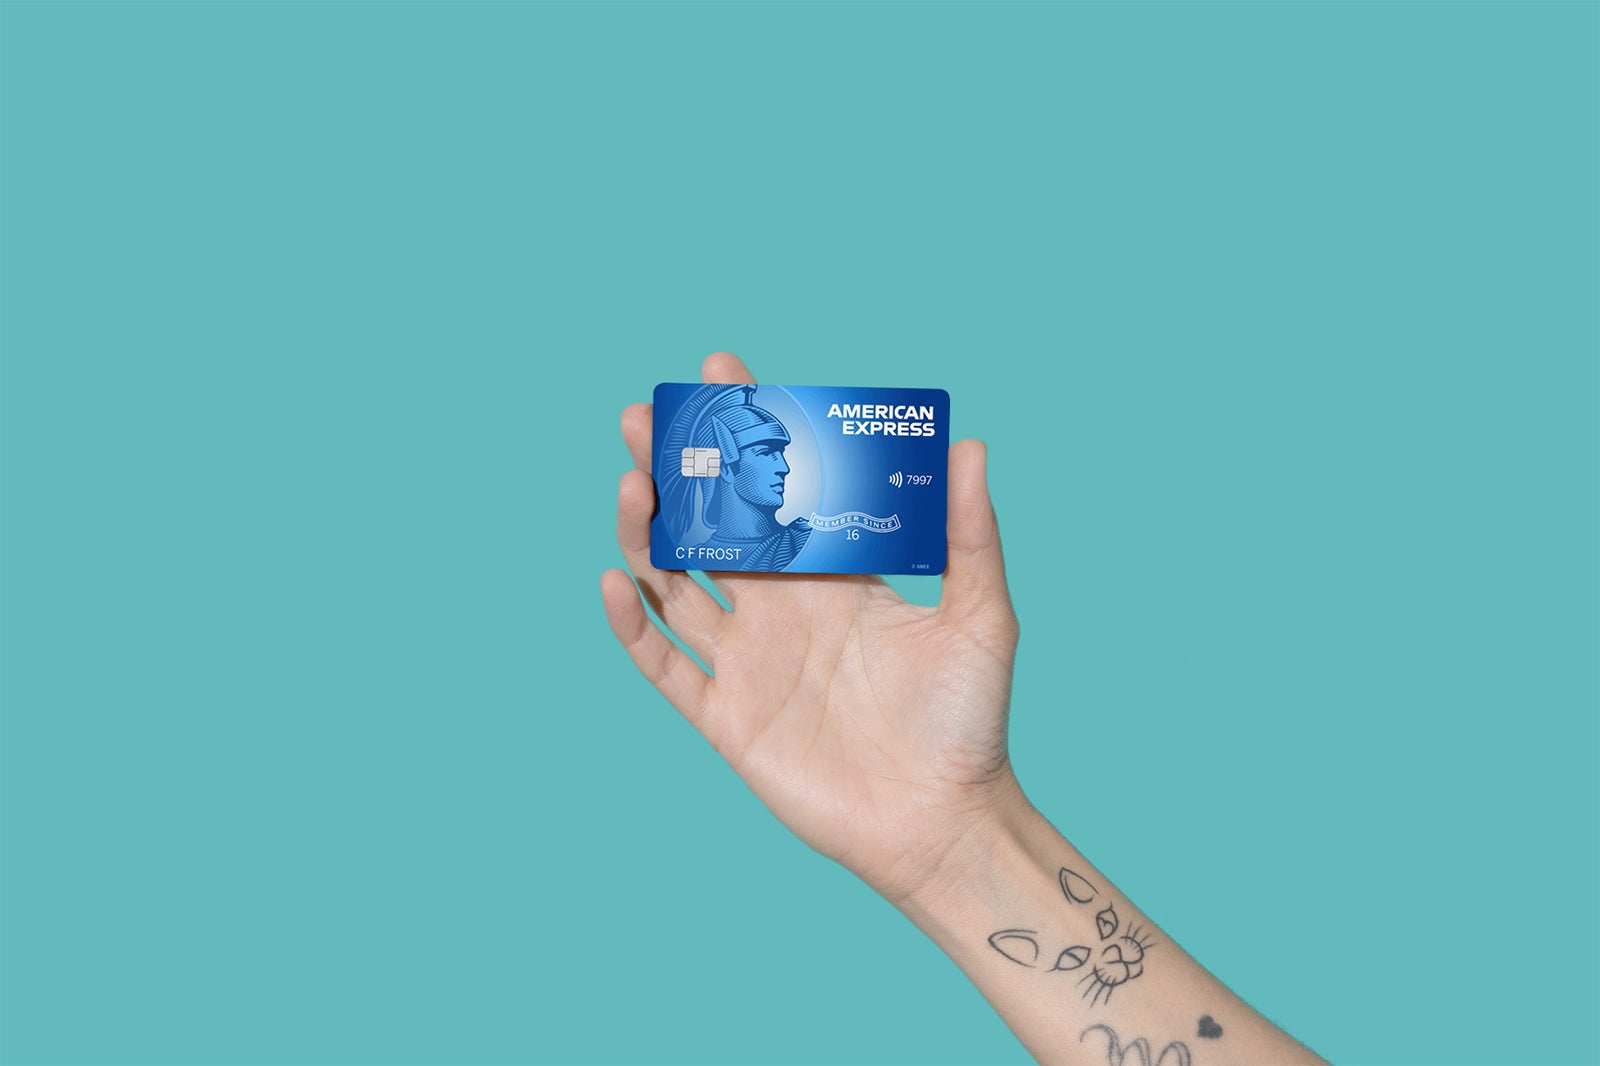 Photo of hand holding Blue Cash Everyday card